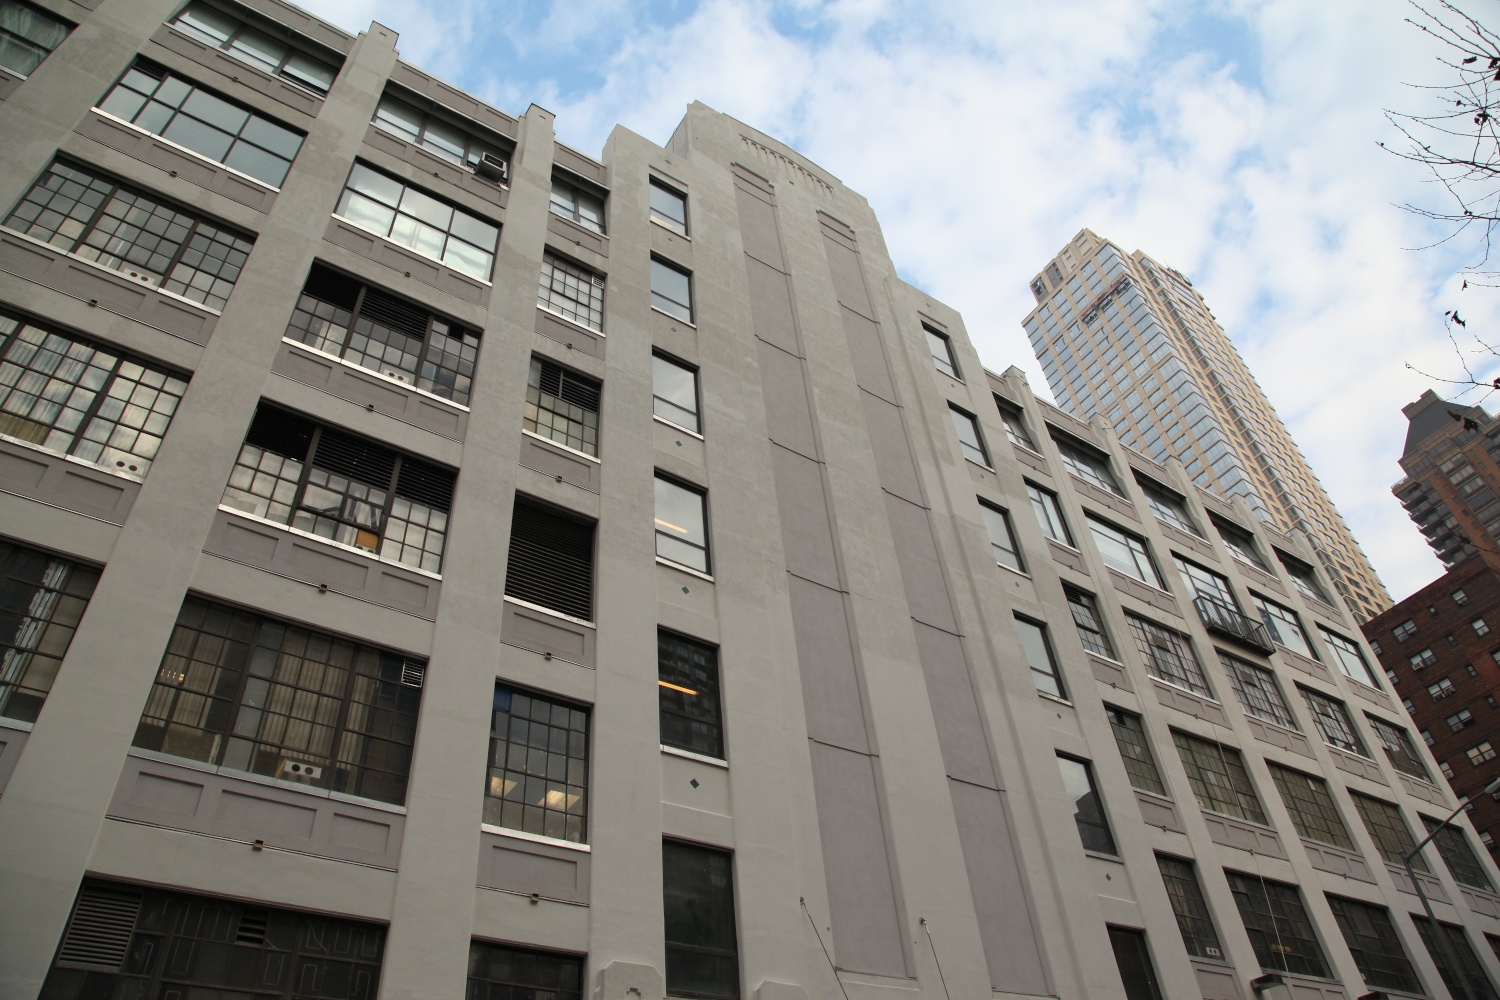 Full view of the renovated 211 West 61st Street building, featuring Jepol Construction's professional concrete repair and stucco restoration, reflecting our expertise in building exterior refurbishment.